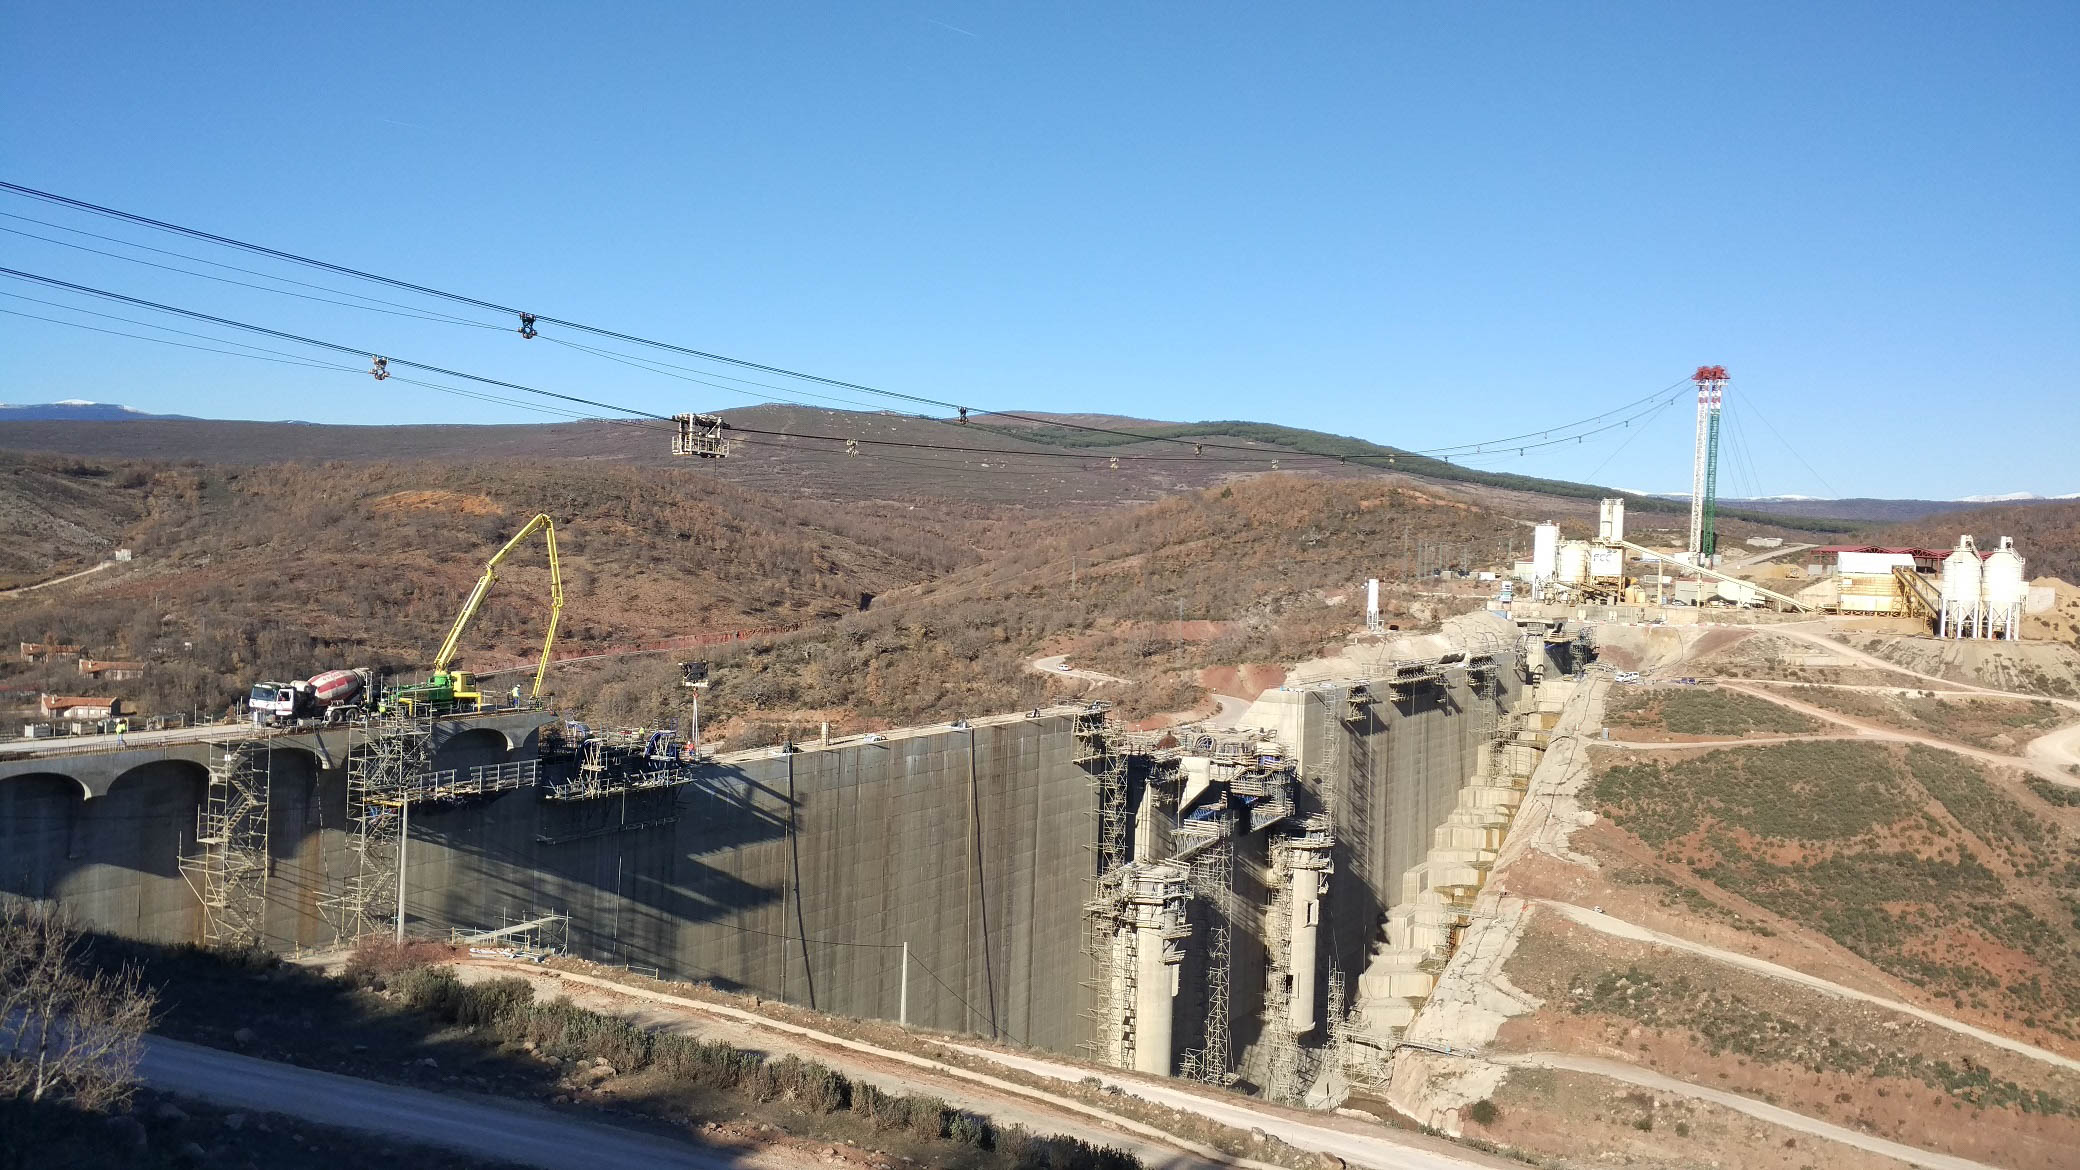 View of cable cranes and dam under construction